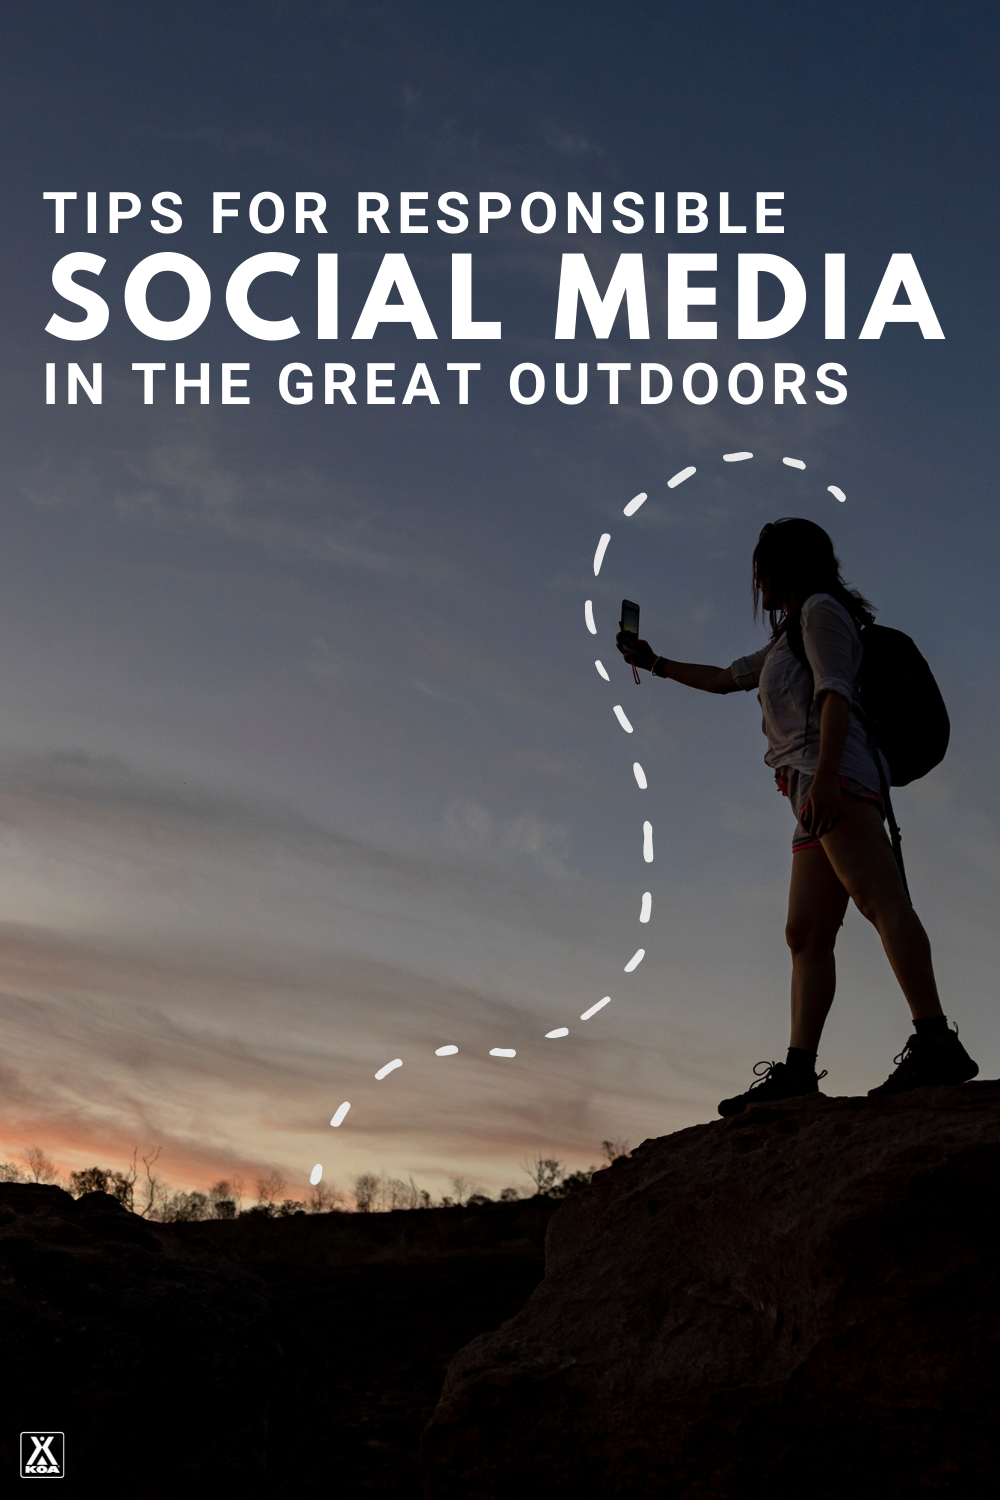 We all love to post photos and updates from our adventures in the great outdoors. It's important to do so responsibly in order to be a good steward and advocate for our natural spaces. Here are nine tips to keep in mind when using social media in the great outdoors.